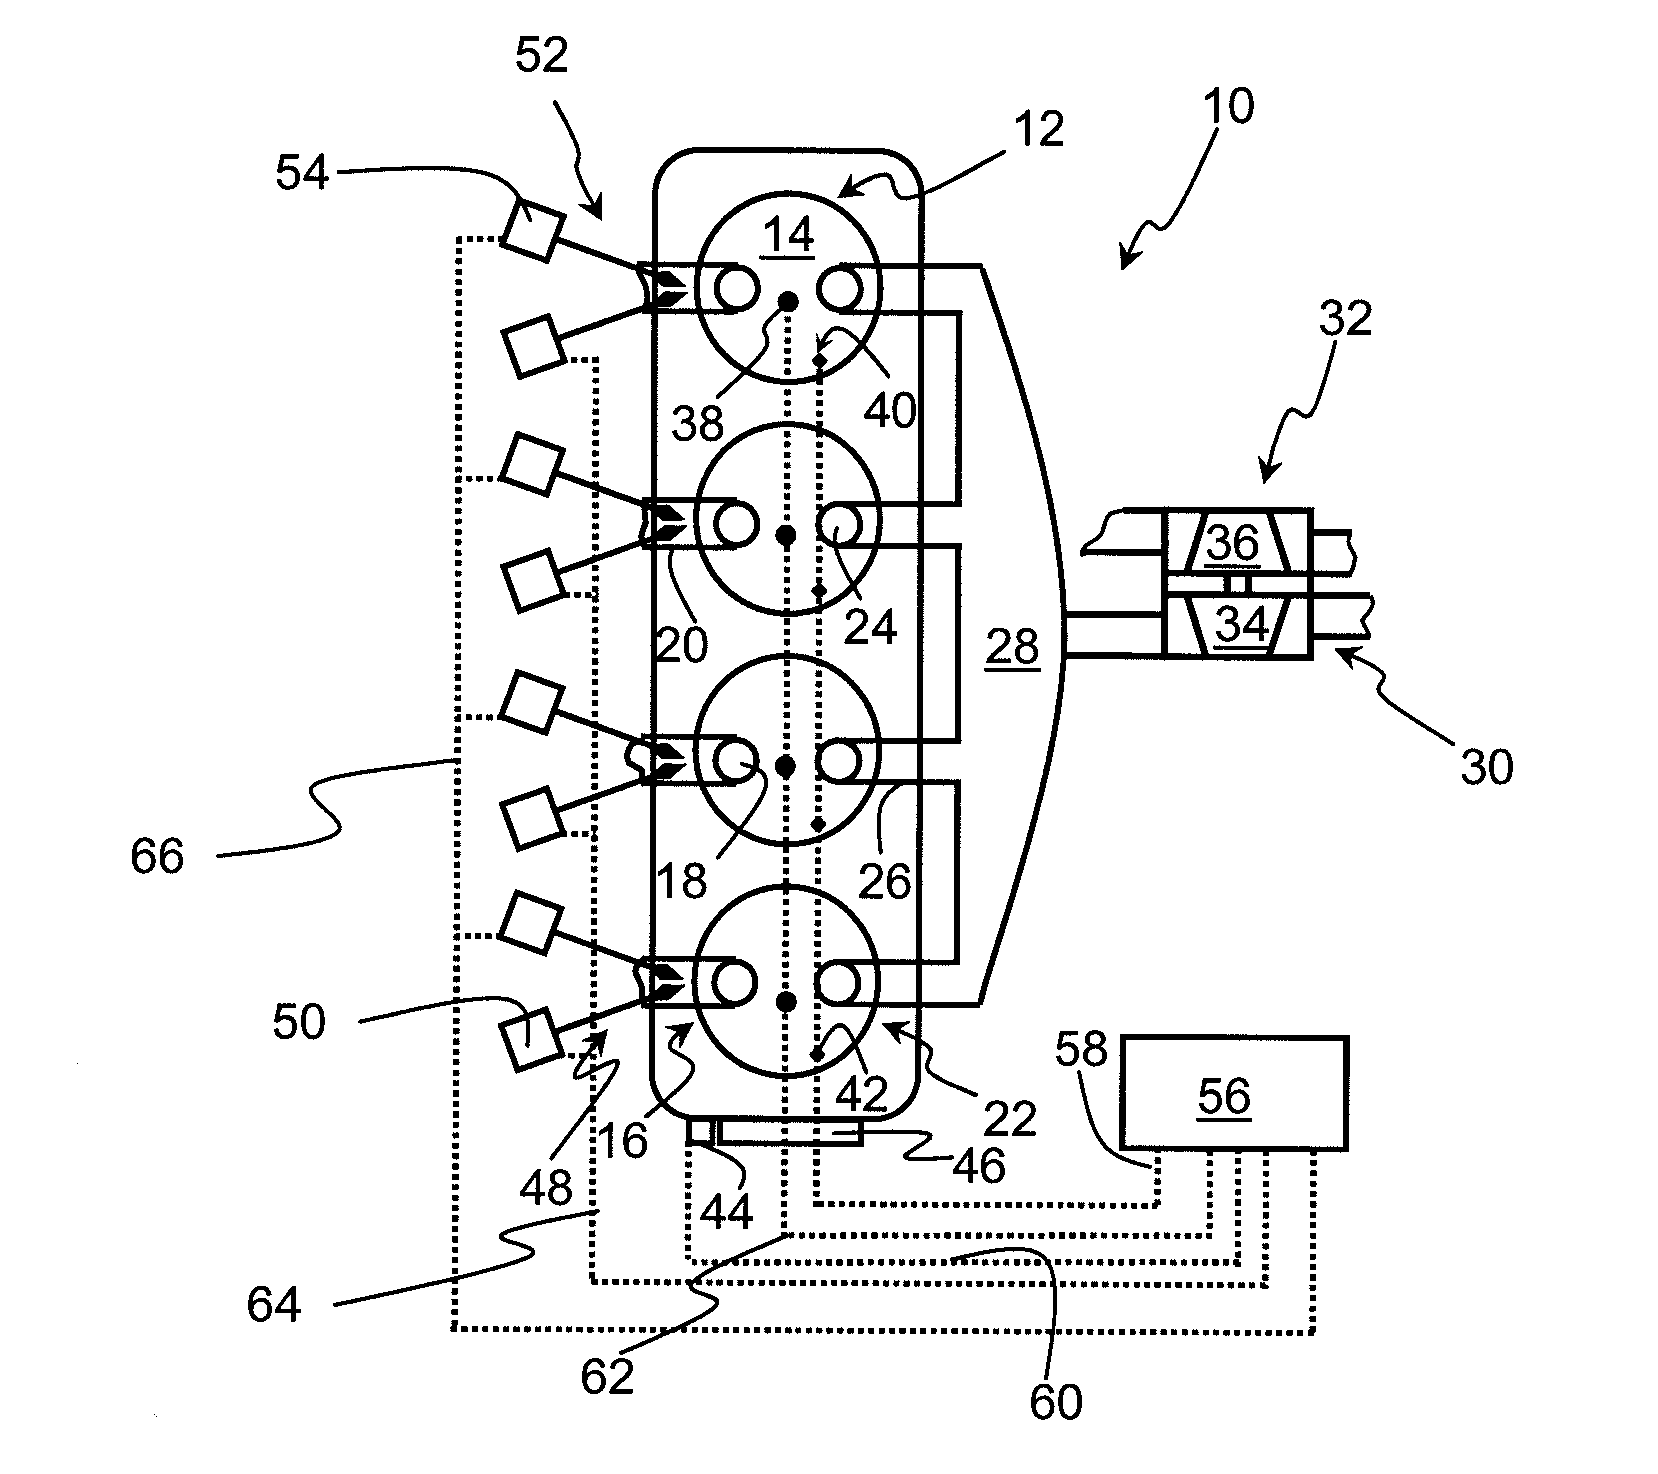 Method of controlling the combustion phase of a fuel mixture of a spark-ingnition supercharged internal-combustion engine, notably of gasoline type